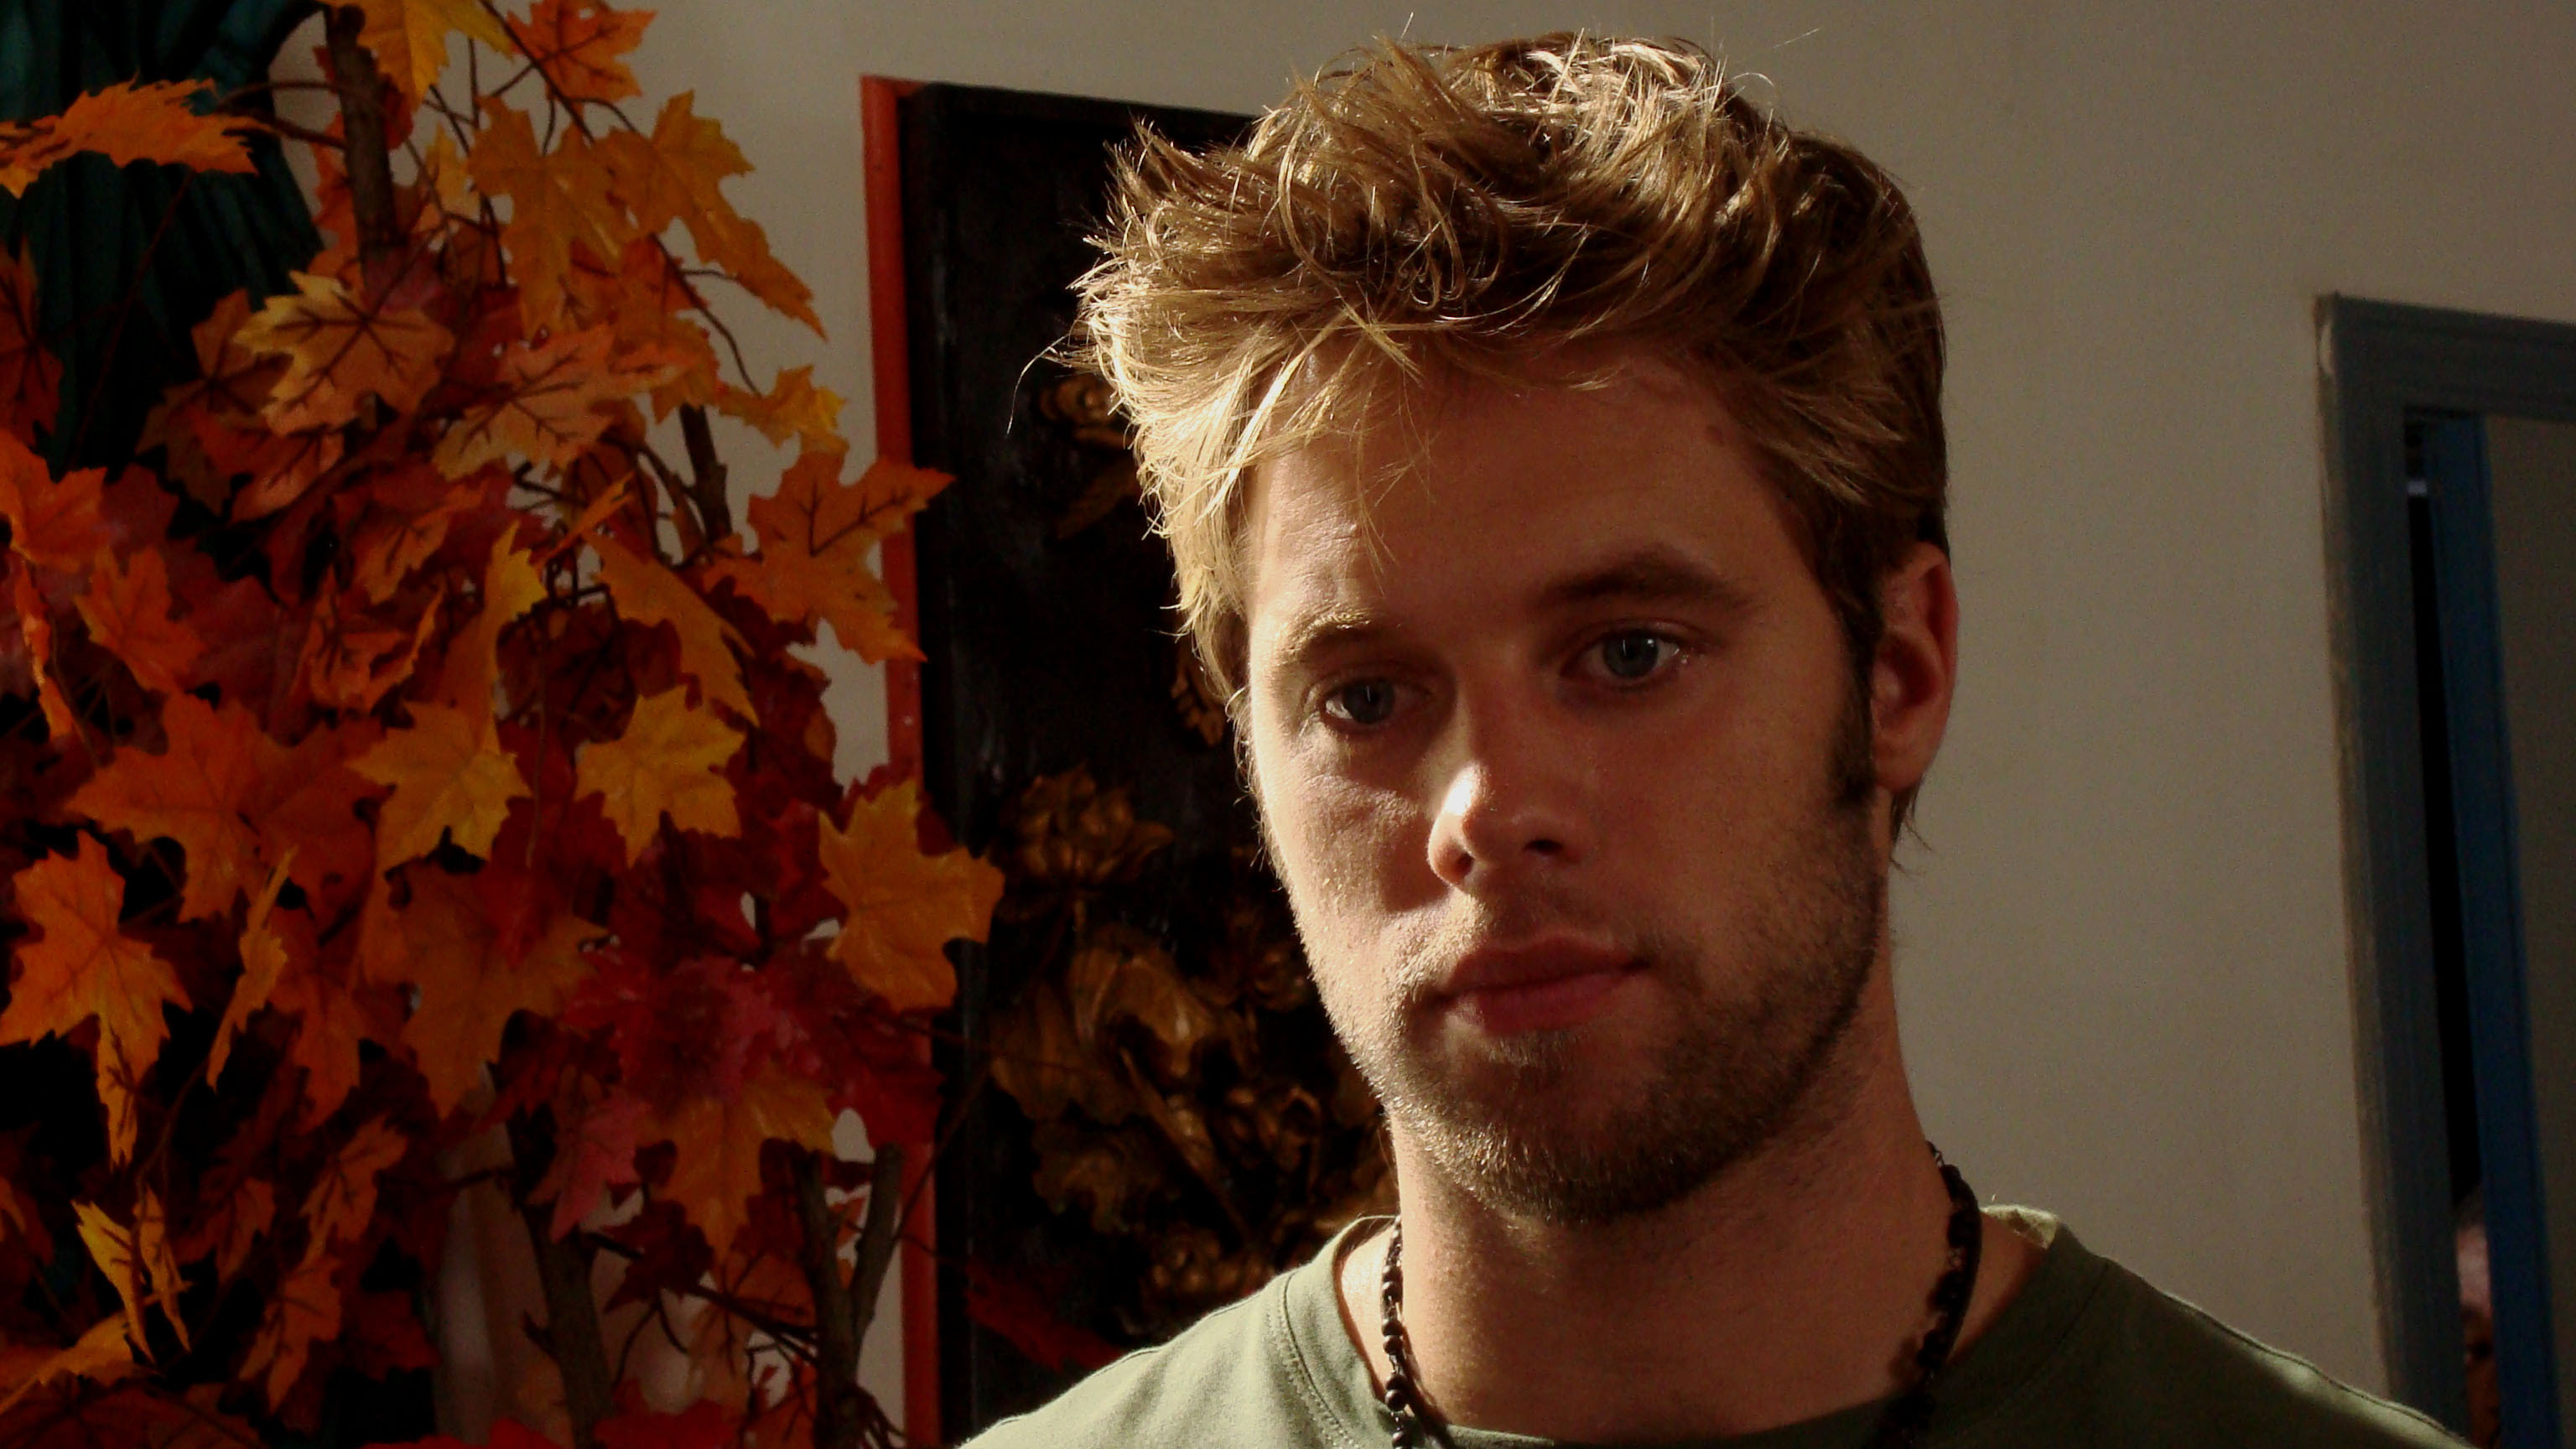 Shaun Sipos in Happy in the Valley (2009)